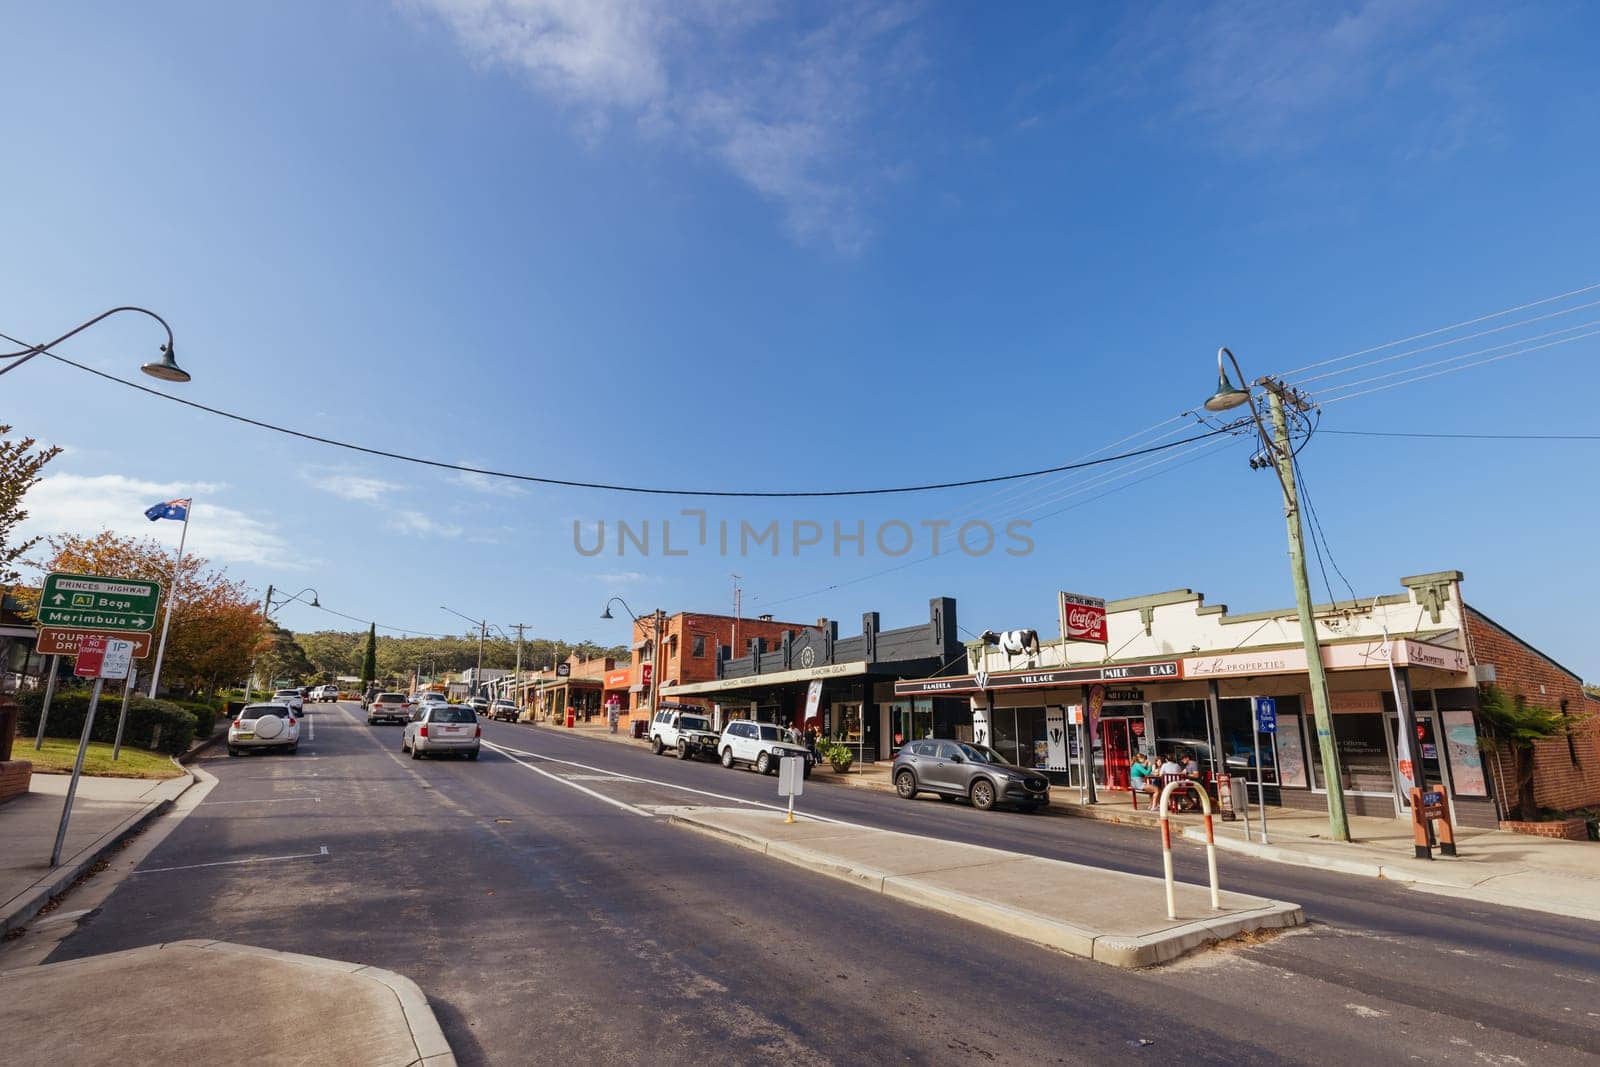 Pambula Township in New South Wales Australia by FiledIMAGE